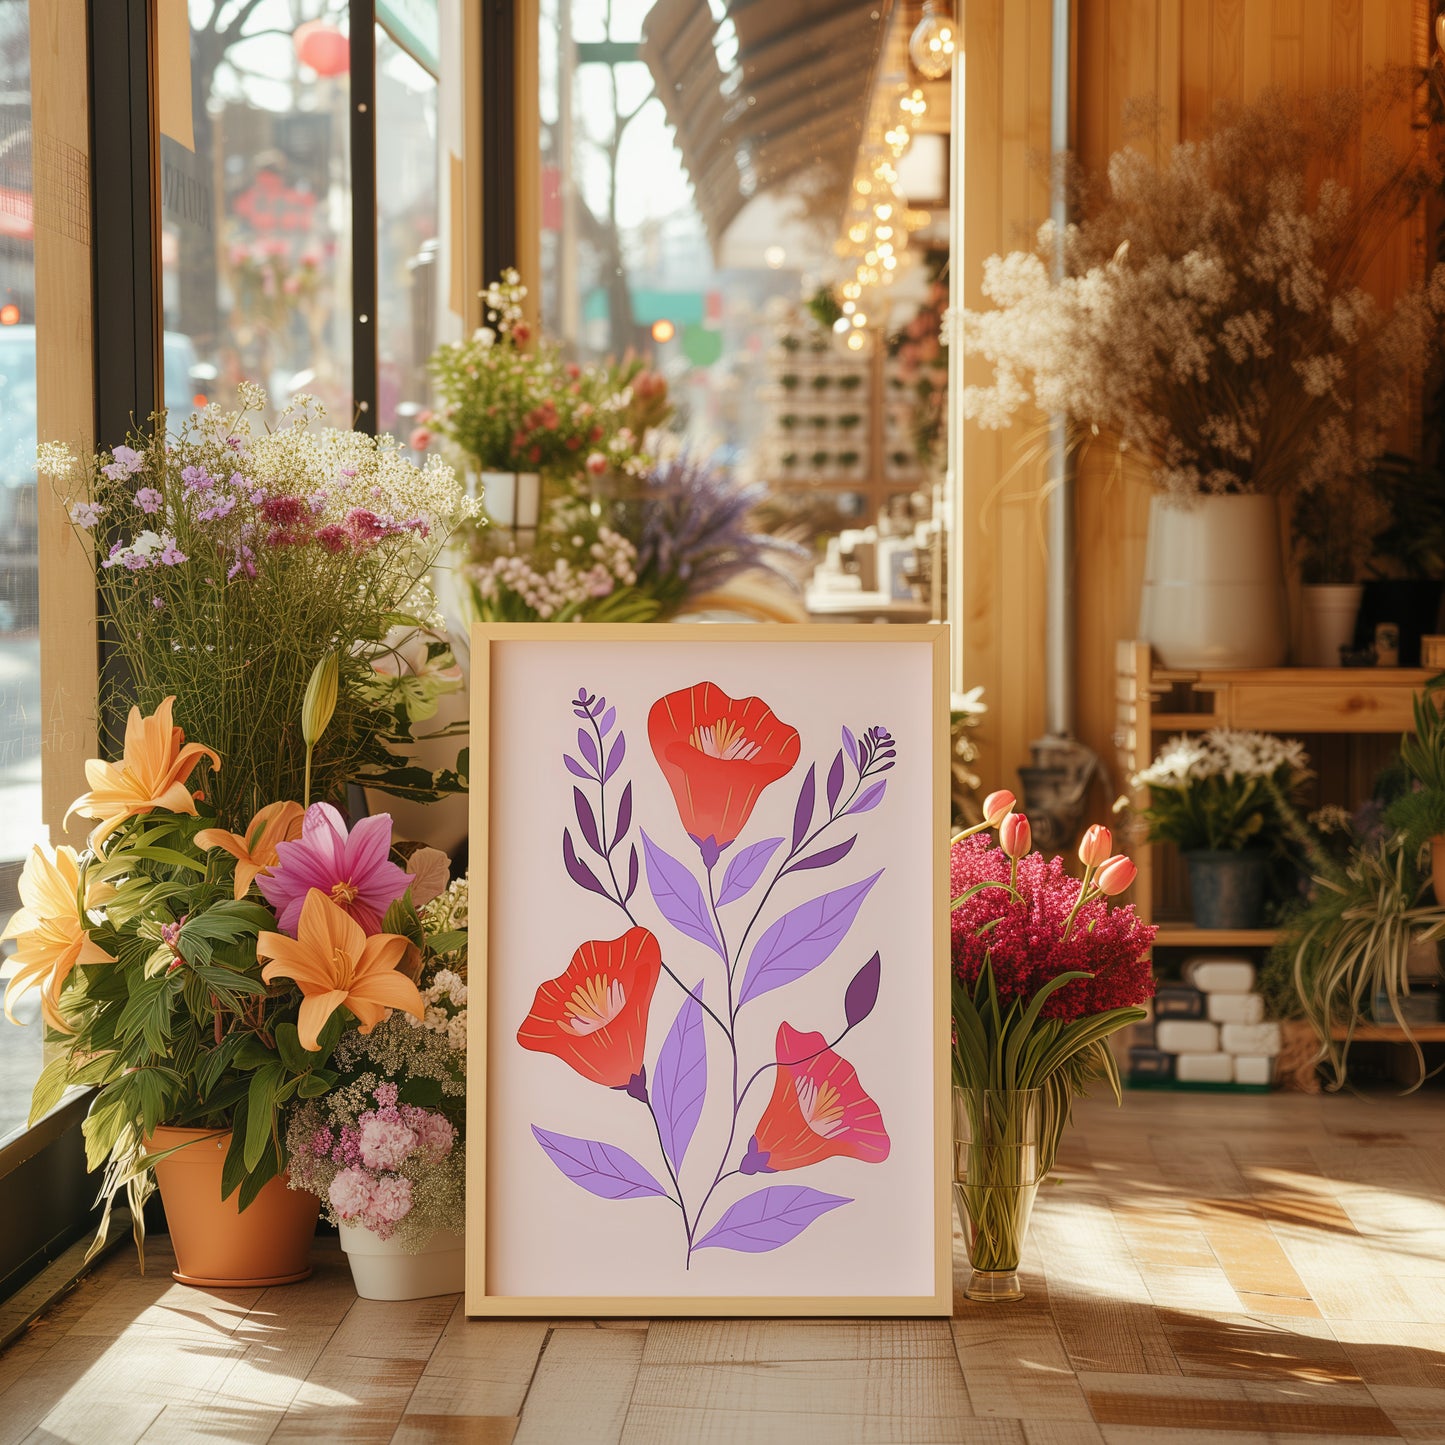 Floral artwork displayed next to fresh flowers inside a sunny, cozy shop.